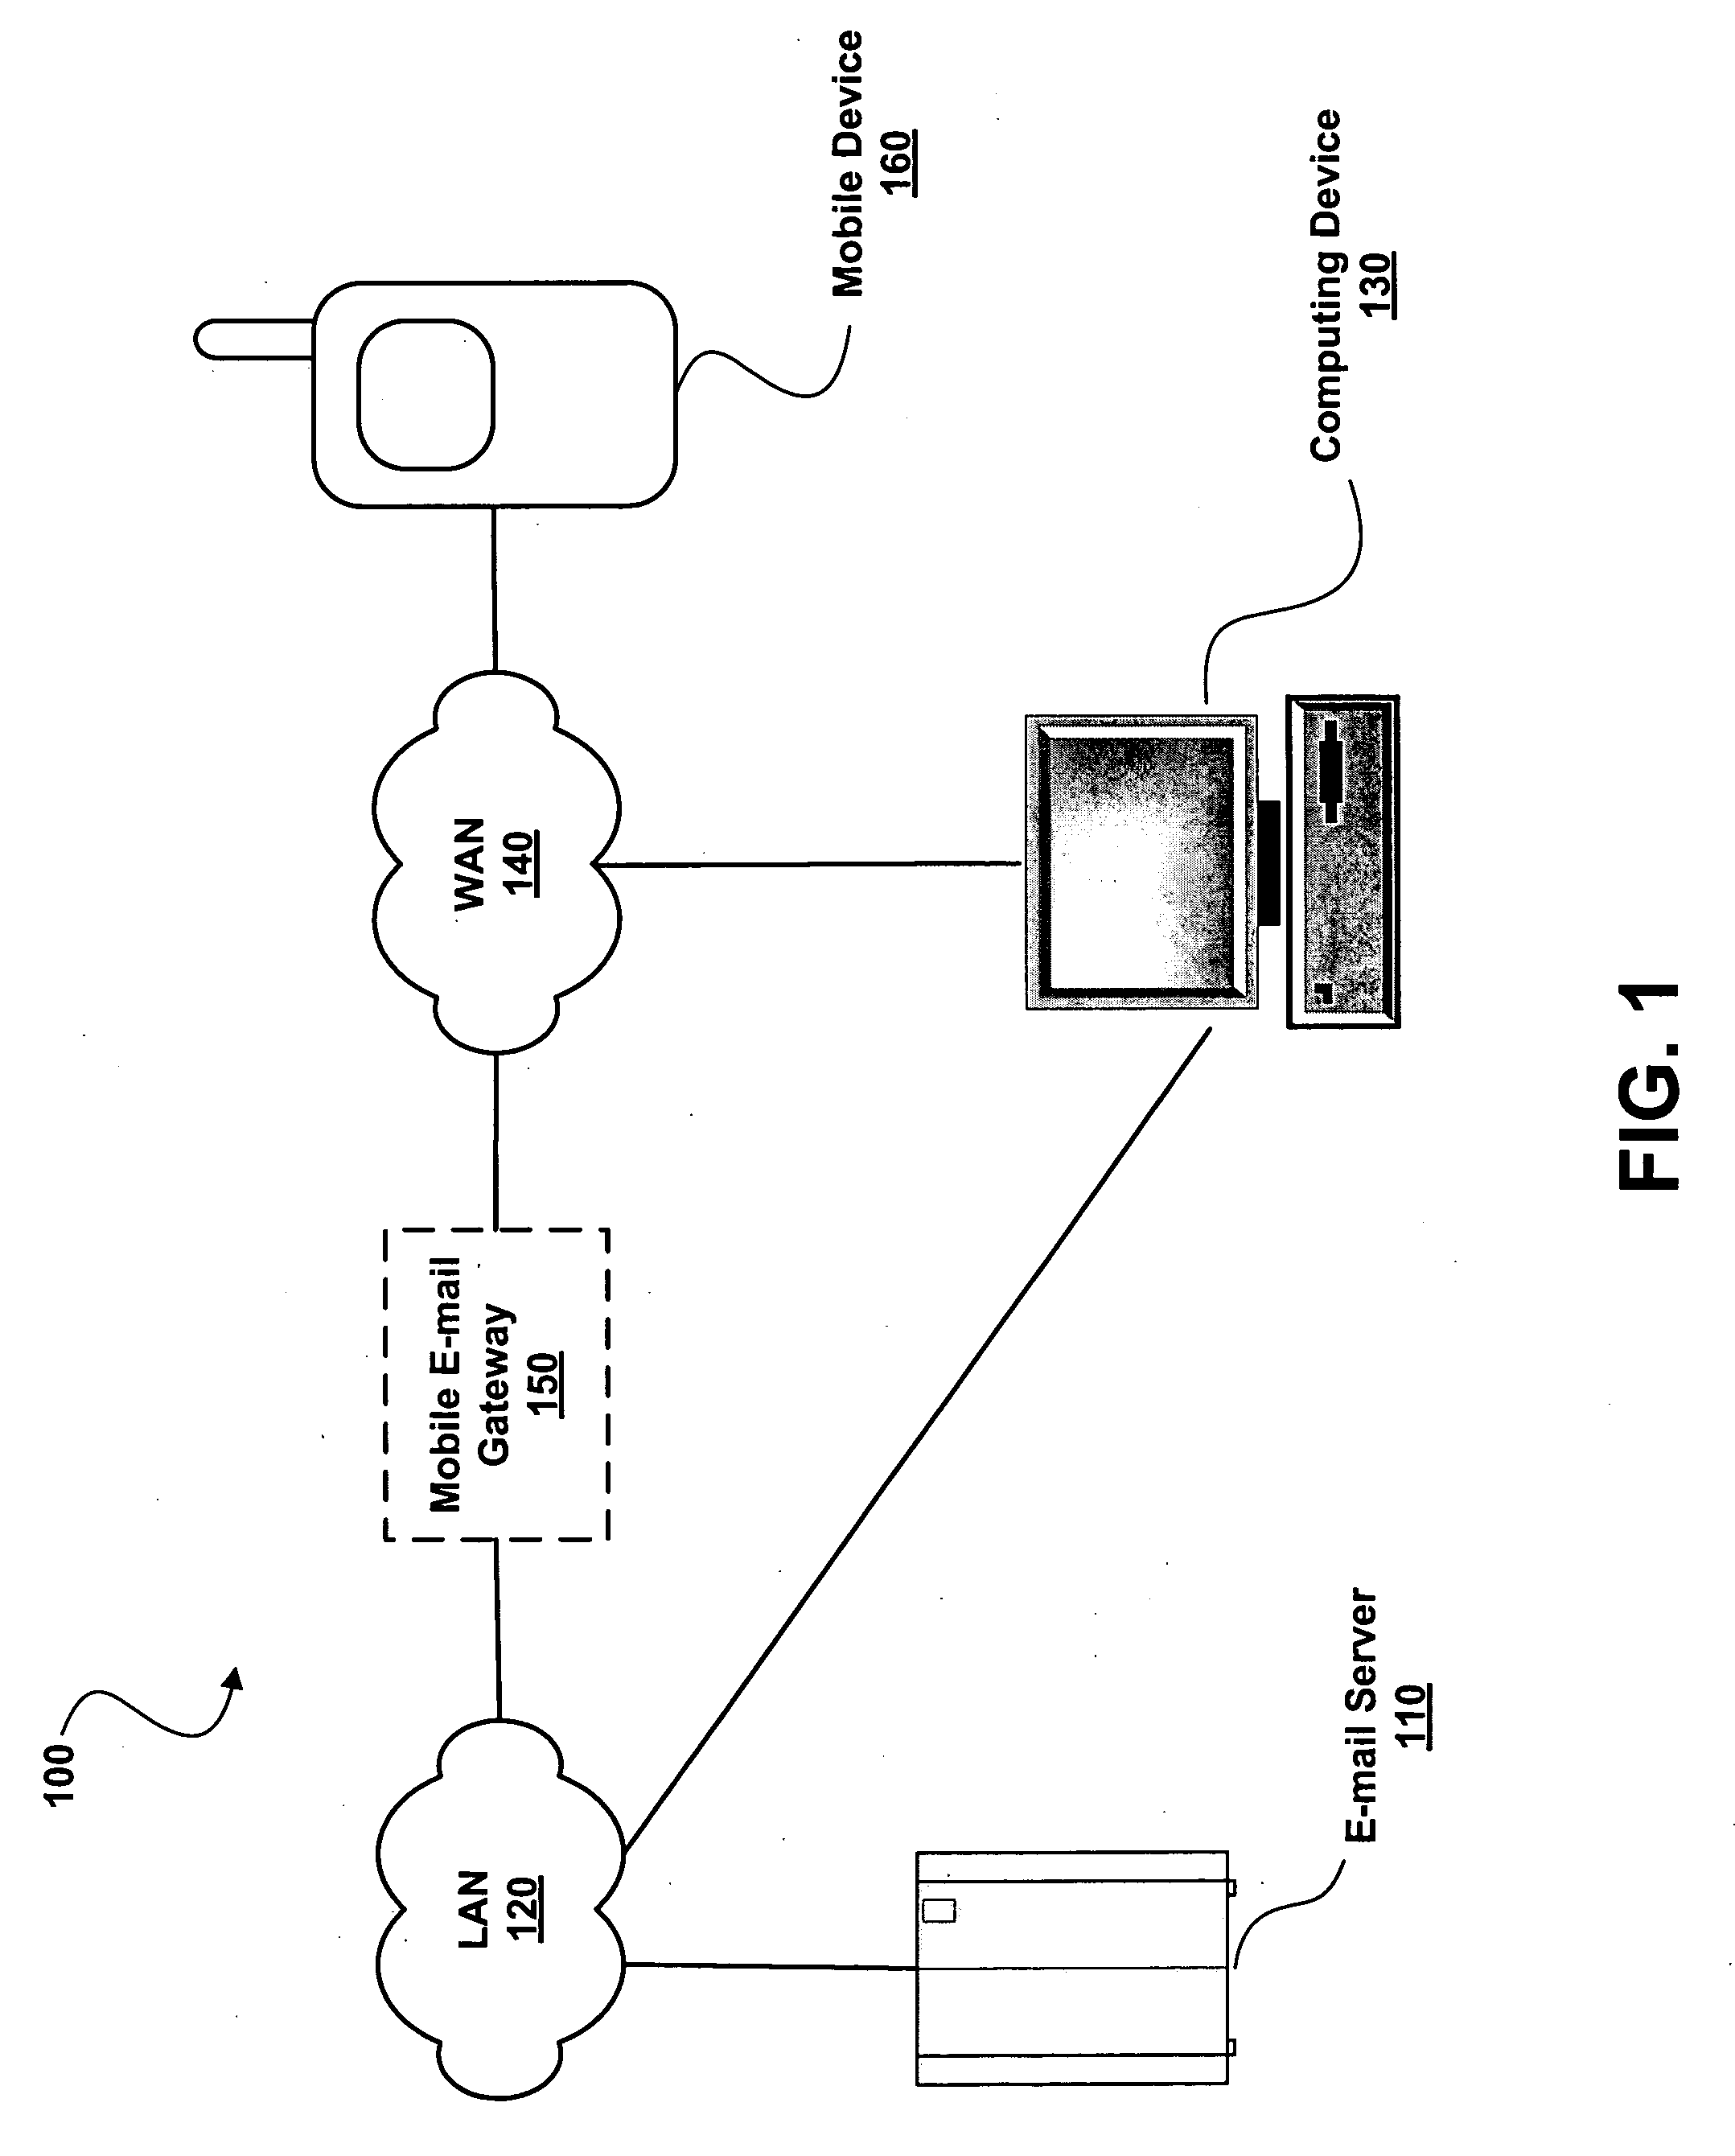 Electronic-mail filtering for mobile devices